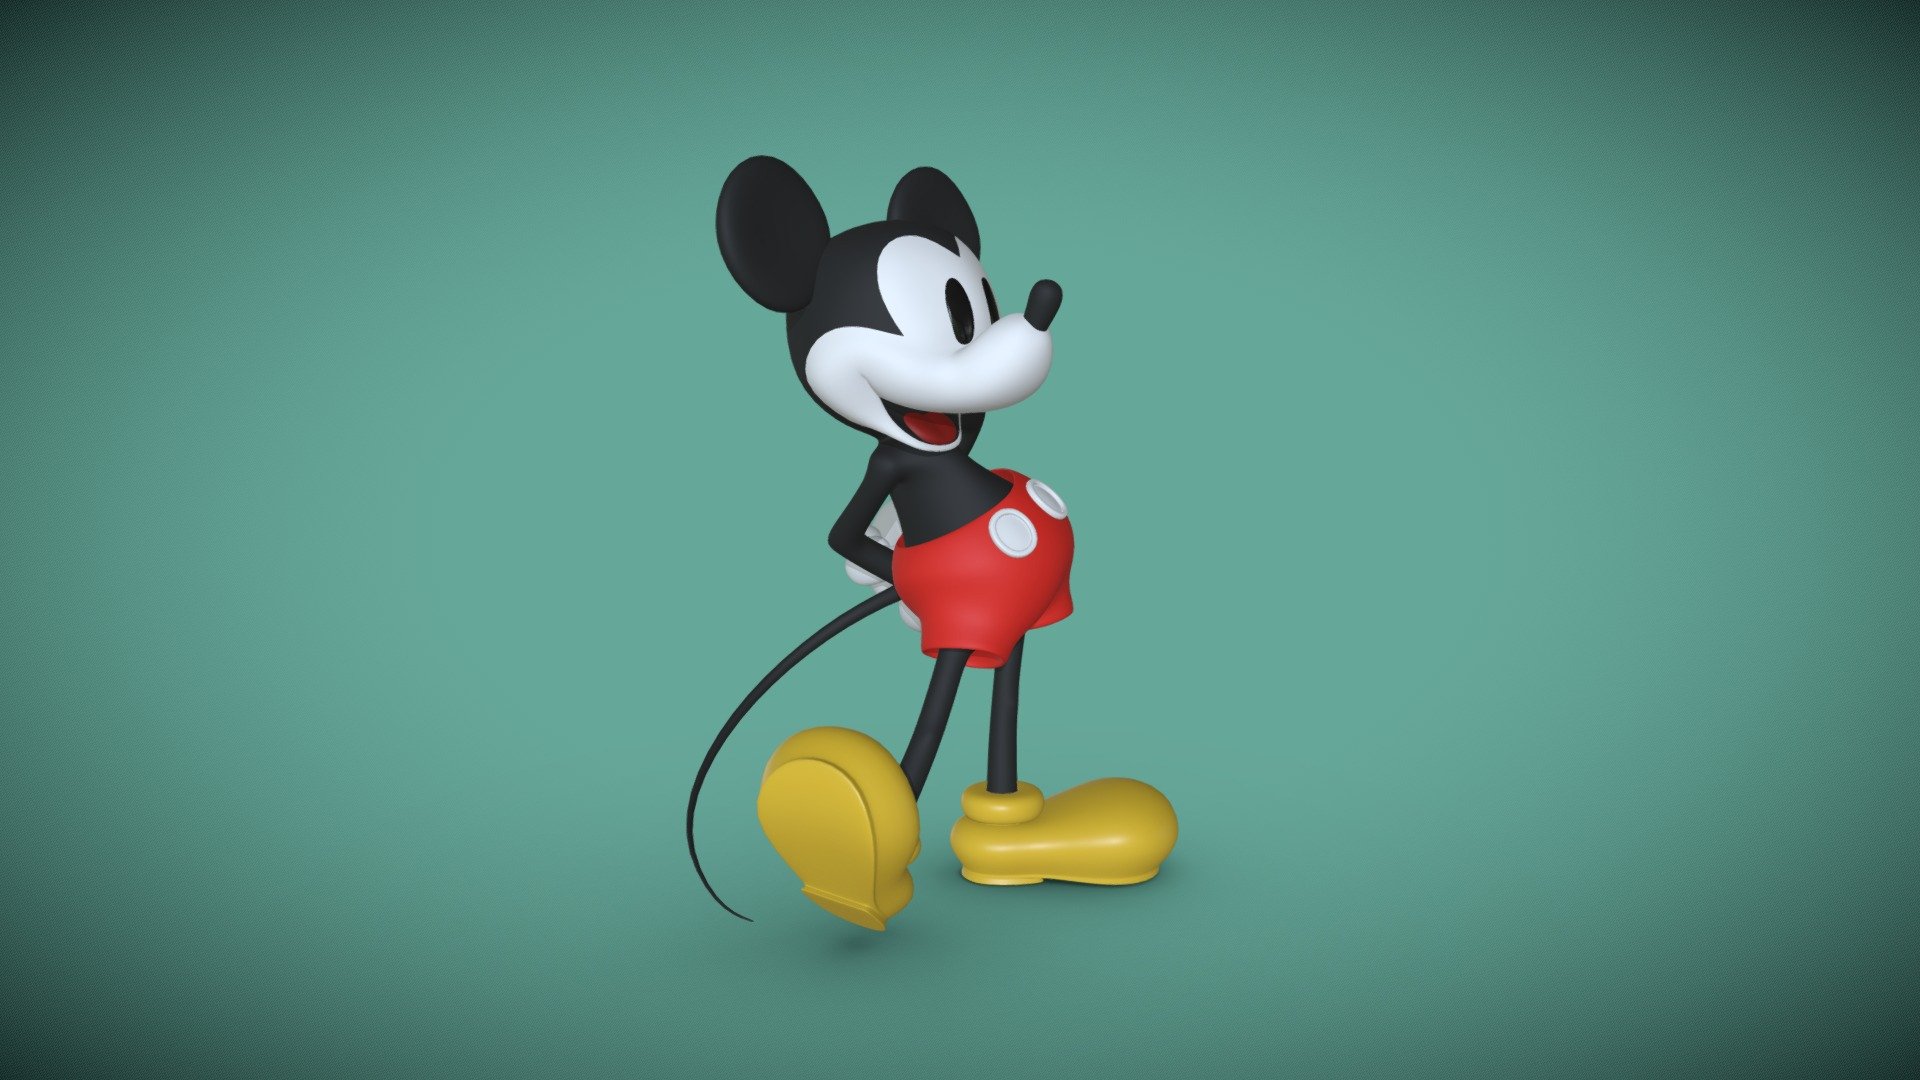 Mickey Mouse model and rig (rigged with rigify) that I did for a free-subject class. 

You can see some videos of the rig in action on my twitter 3d model